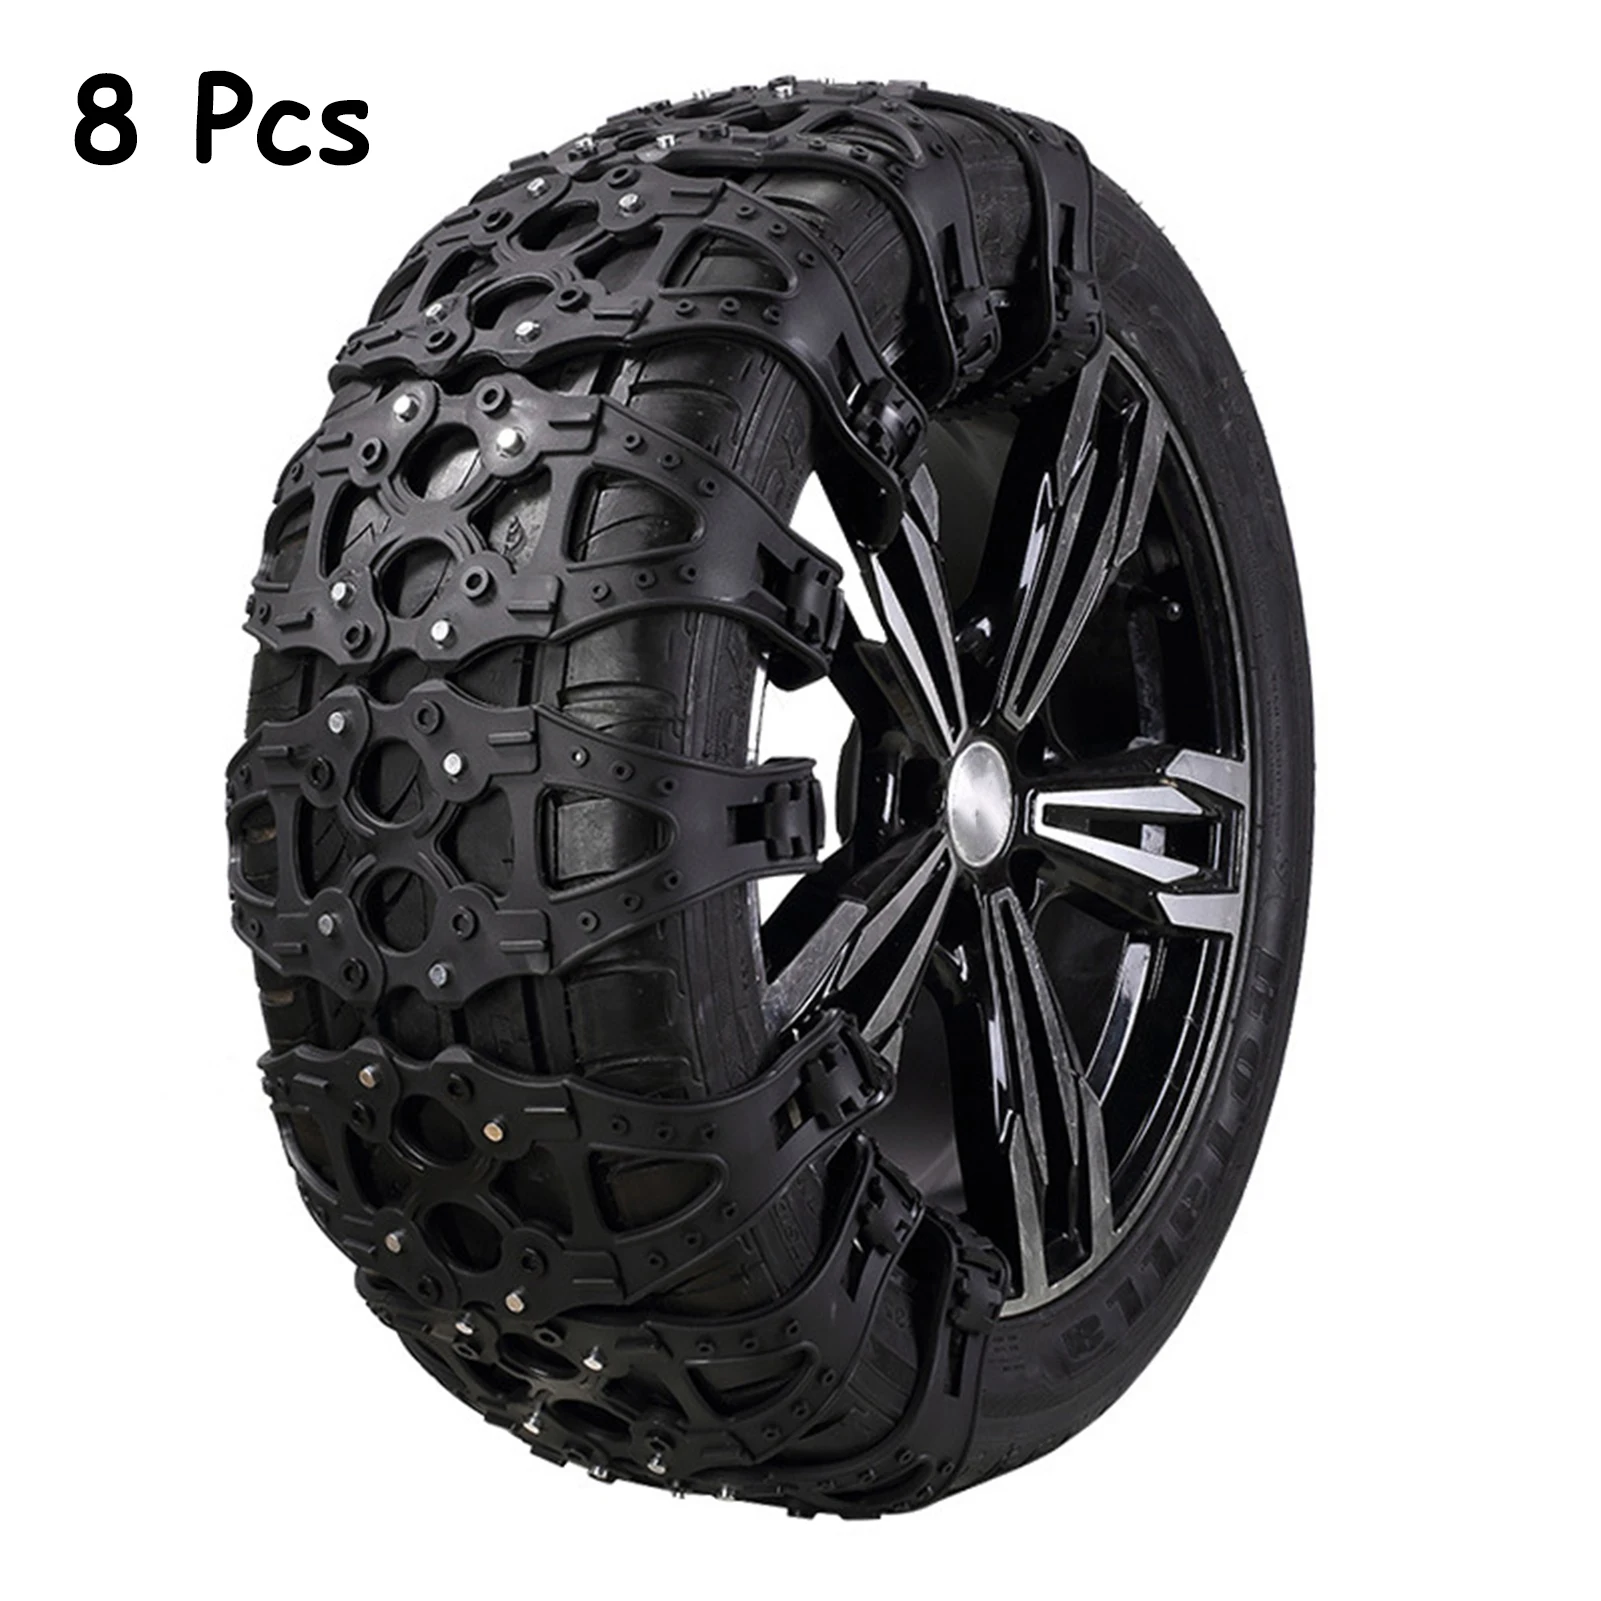 Universal Car Grip Tracks Traction Mat Recovery Traction Mat Portable  Emergency Track Tire Ladder For Ice Snow Sand Off-road - Snow Chains -  AliExpress